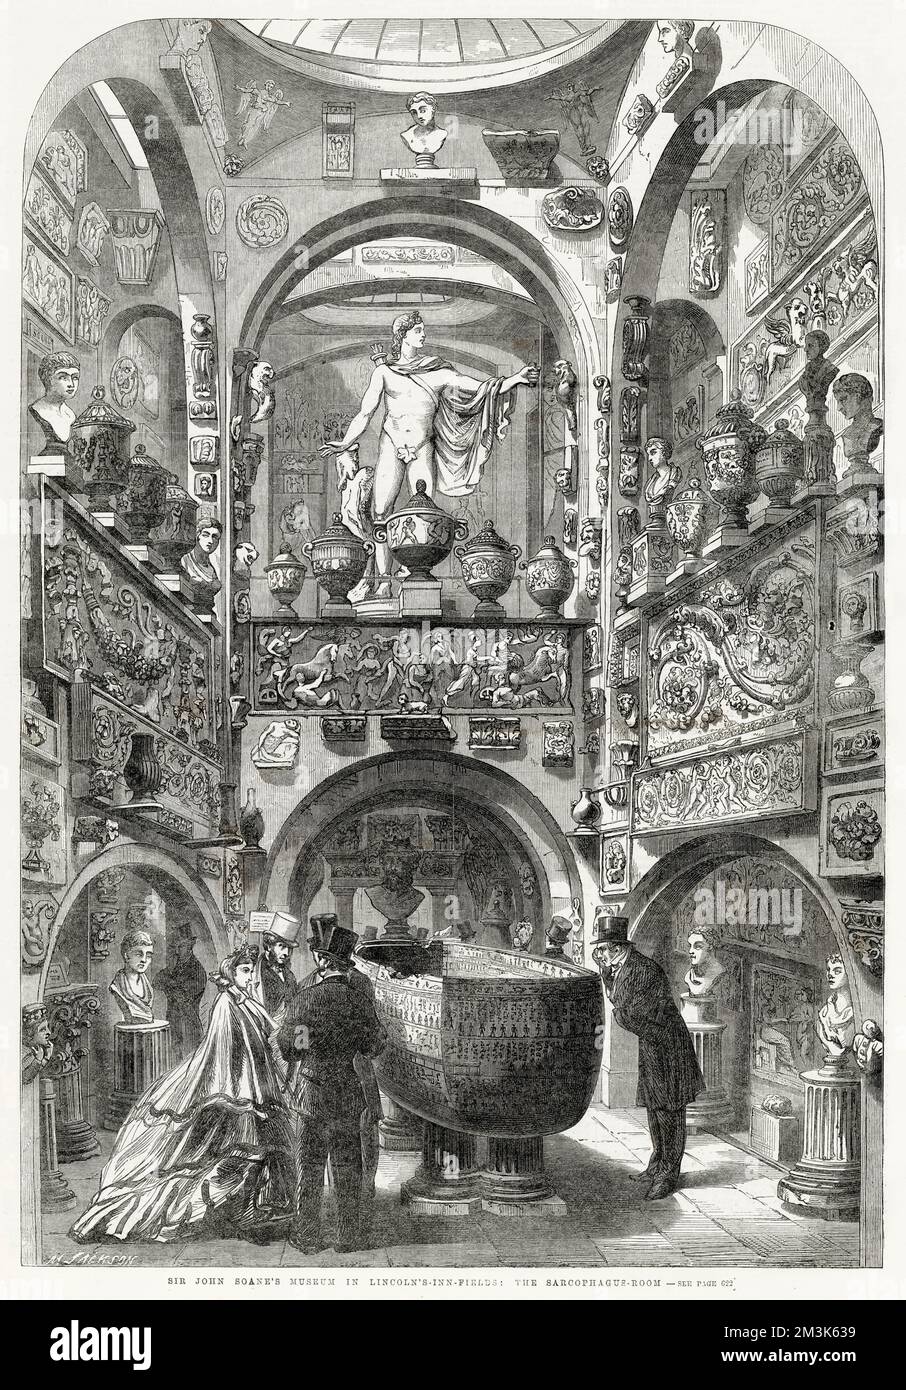 Interior of the Sarcophagus Room of Sir John Soane's Museum in Lincoln's Inn Fields, London.  Several visitors in Victorian dress are shown admiring the ancient objects and sculptures. Stock Photo